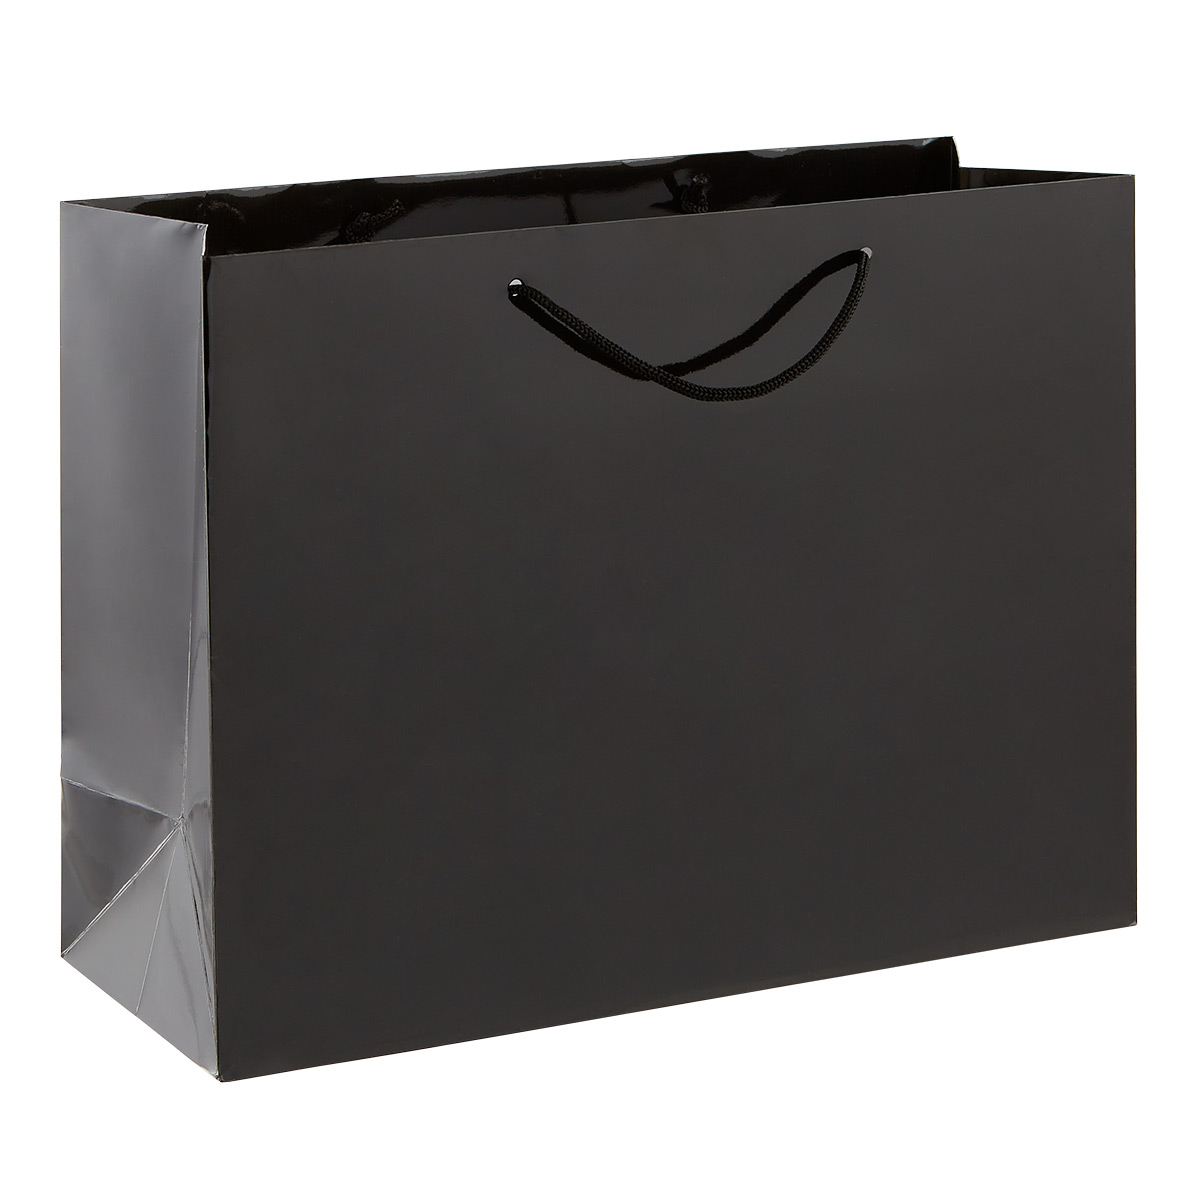 LEAFIPO 50 Pcs Large Black Charcoal Paper Bags With Handles India | Ubuy